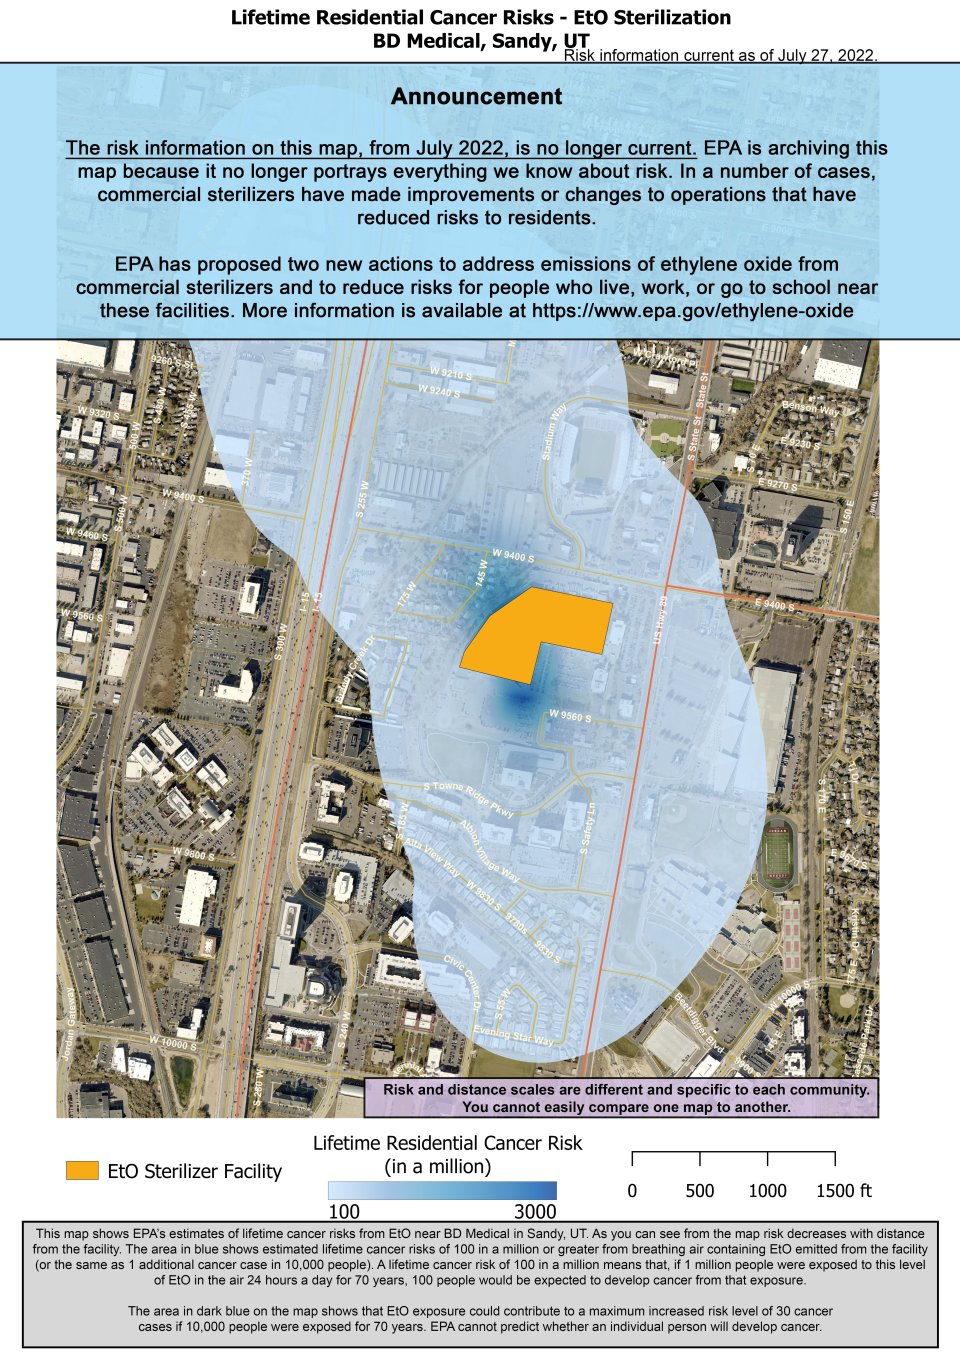 This map shows EPA’s estimate of lifetime cancer risks from breathing ethylene oxide near BD Medical located at 9450 State St. in Sandy, UT. The area in blue shows estimated lifetime cancer risks at 100 in a million or greater from breathing air containing EtO emitted from the facility. Nearest the facility, the estimated lifetime cancer risk is 2,547 in a million. Estimated cancer risk decreases with distance from the facility.